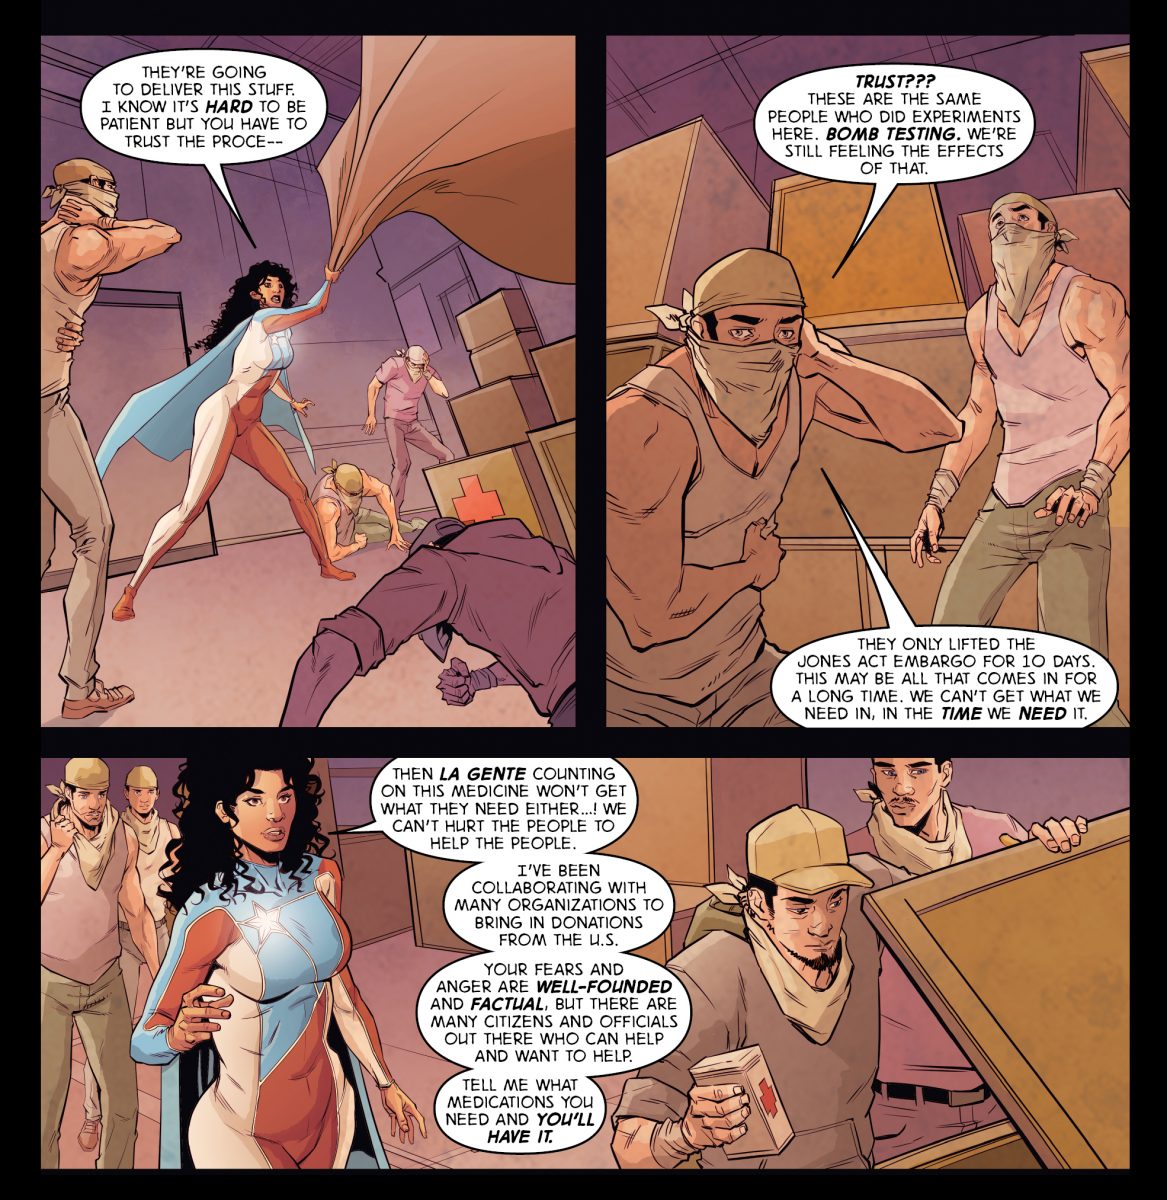 Story by Rosario Dawson and Gus Vazquez for the "Ricanstruction" anthology for Puerto Rico